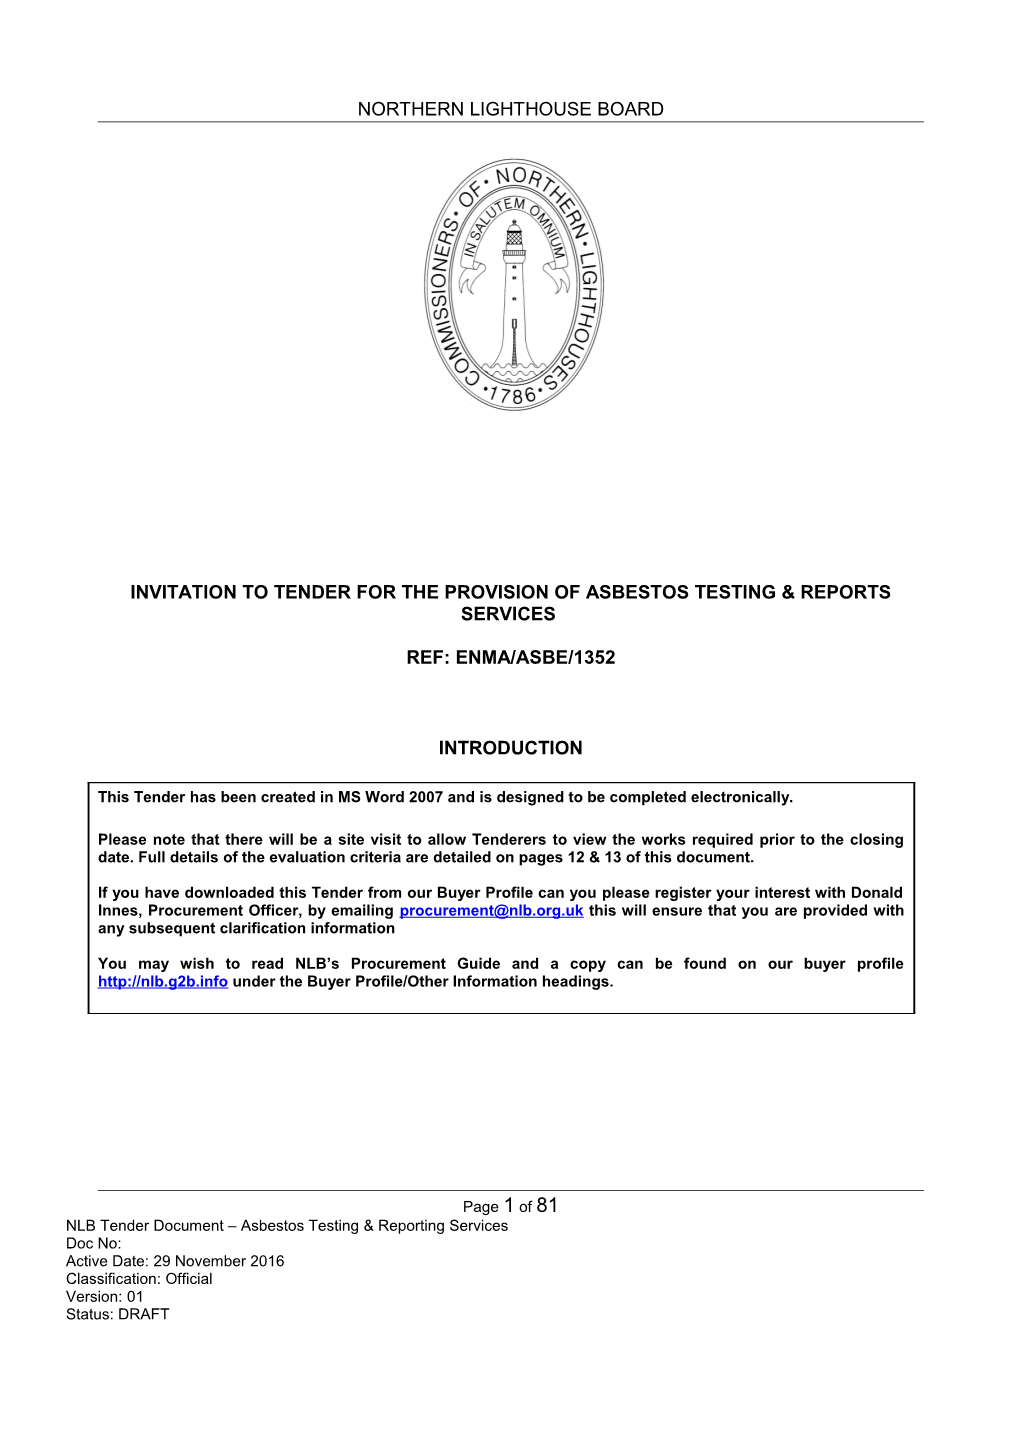 Invitation to Tender for the Provision of Asbestos Testing & Reports Services